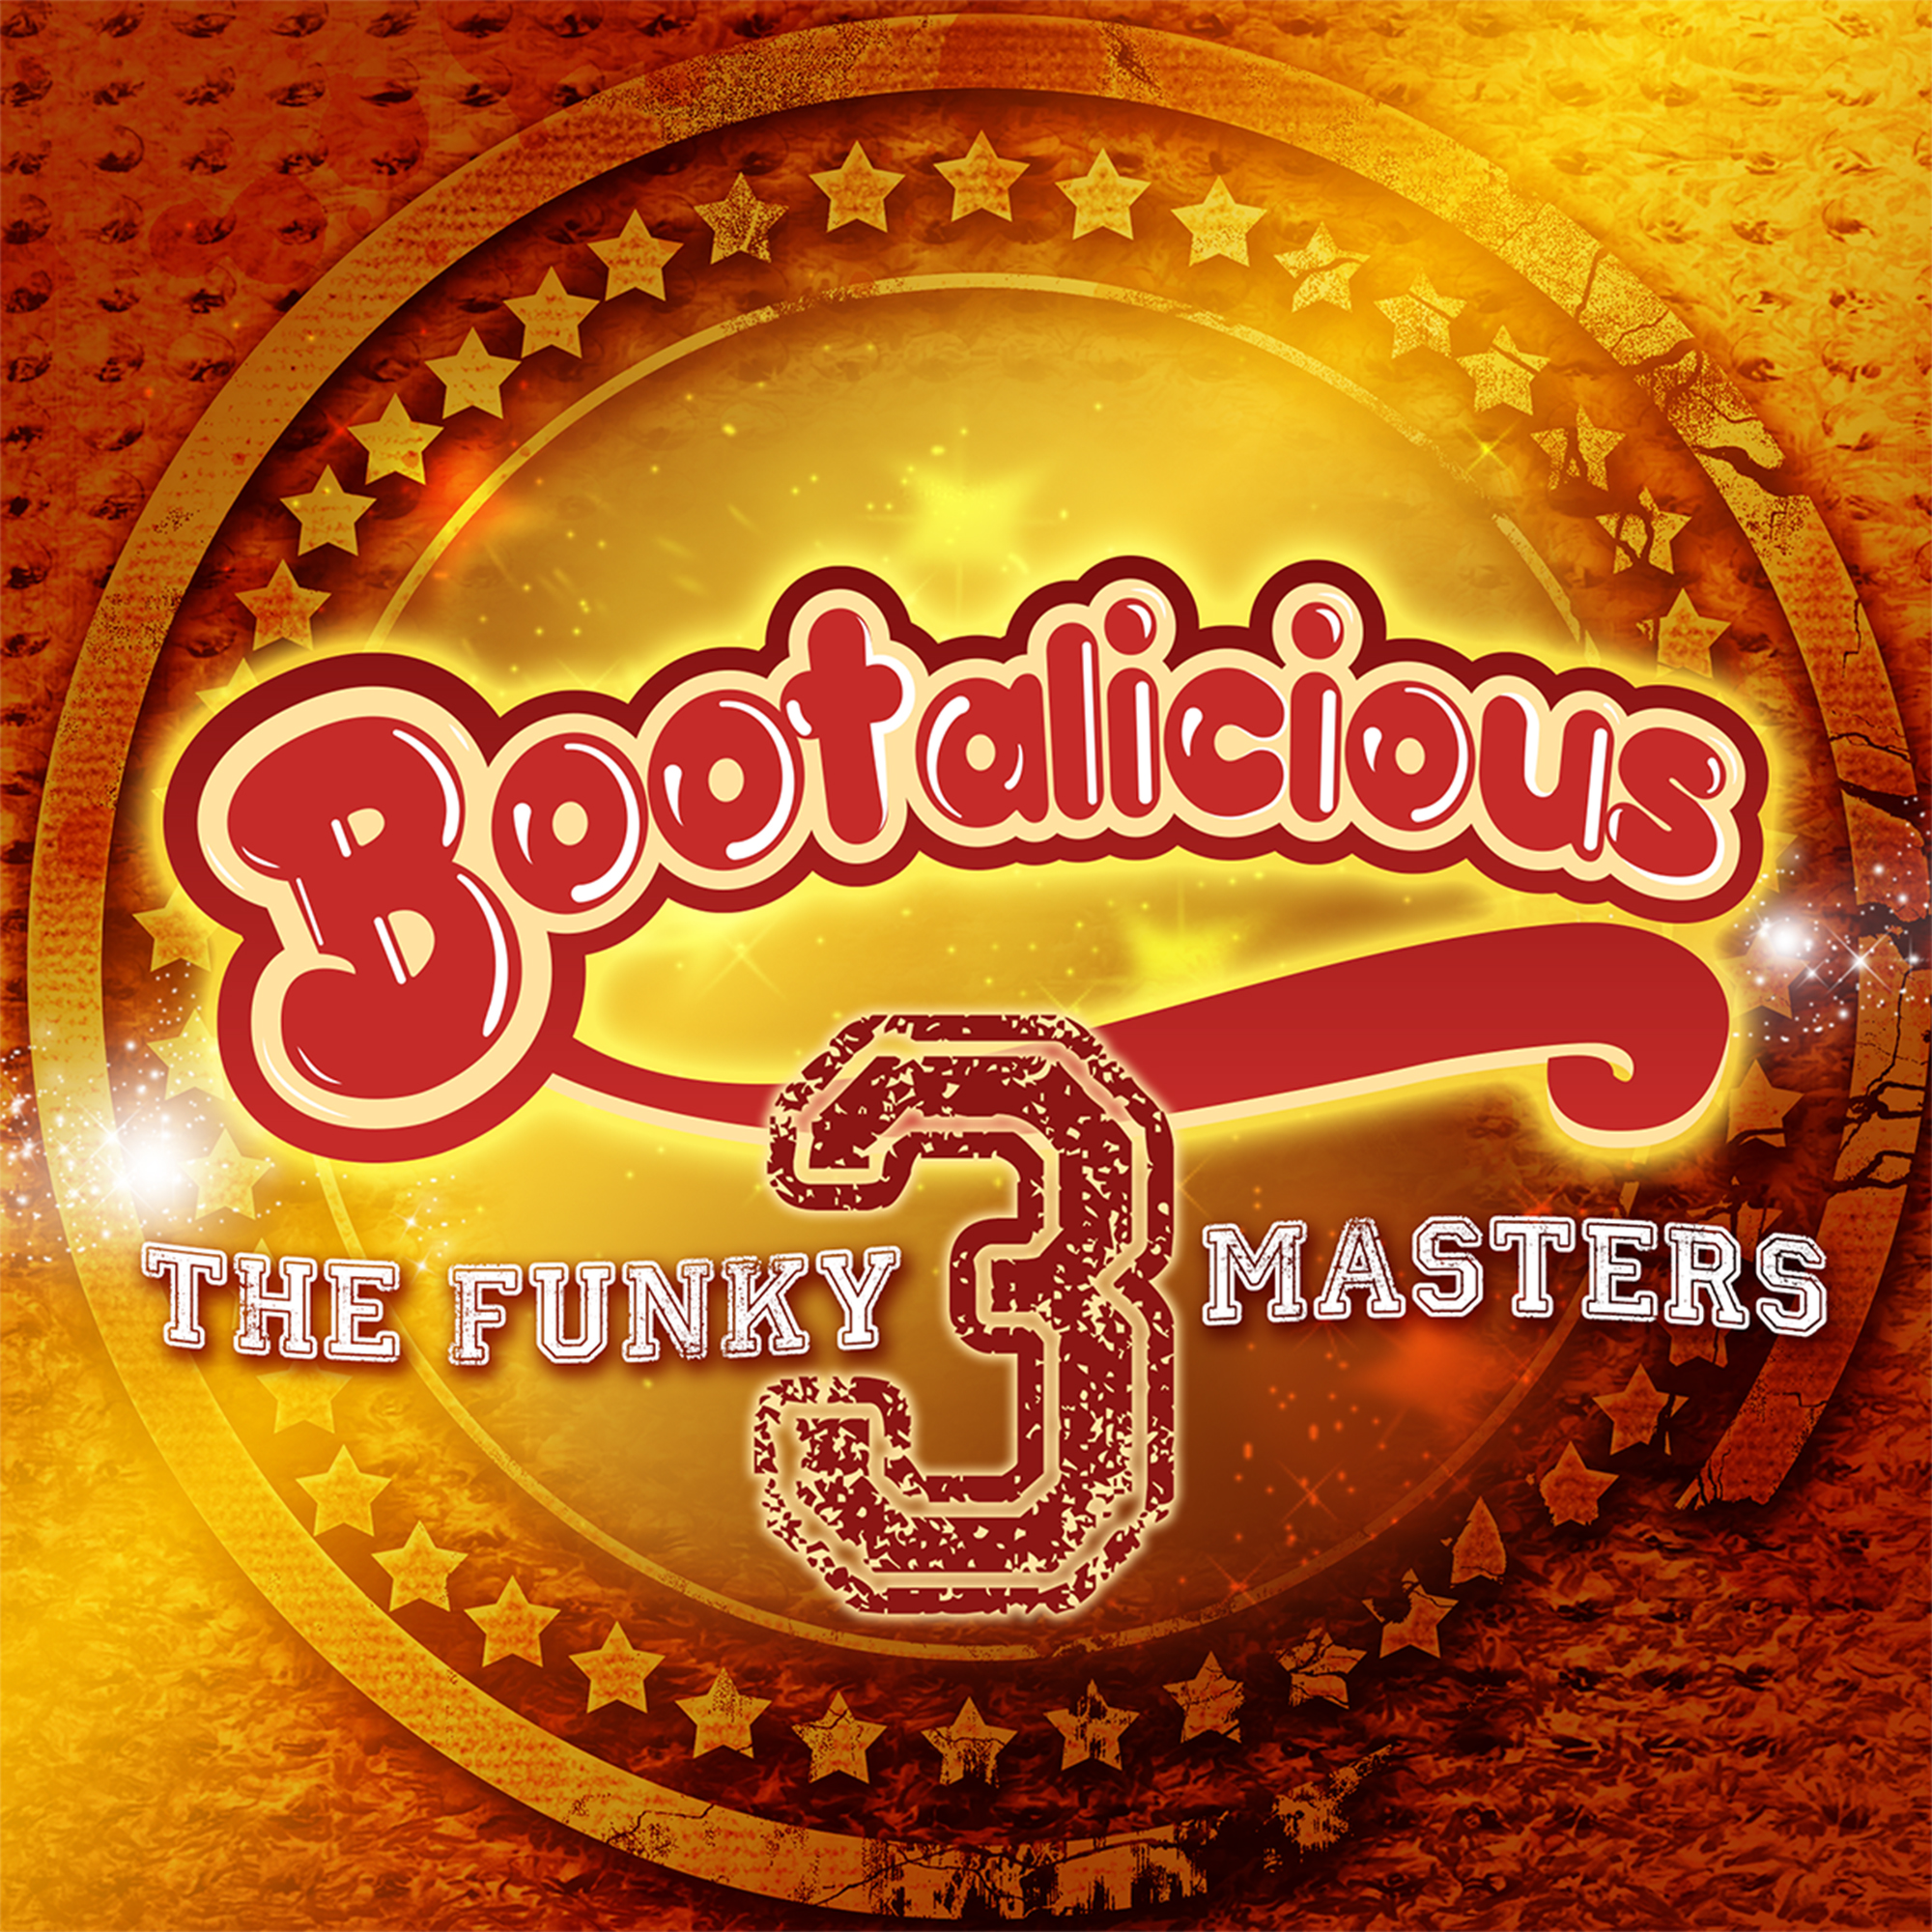 Bootalicious - The Funky Masters - Vol 3